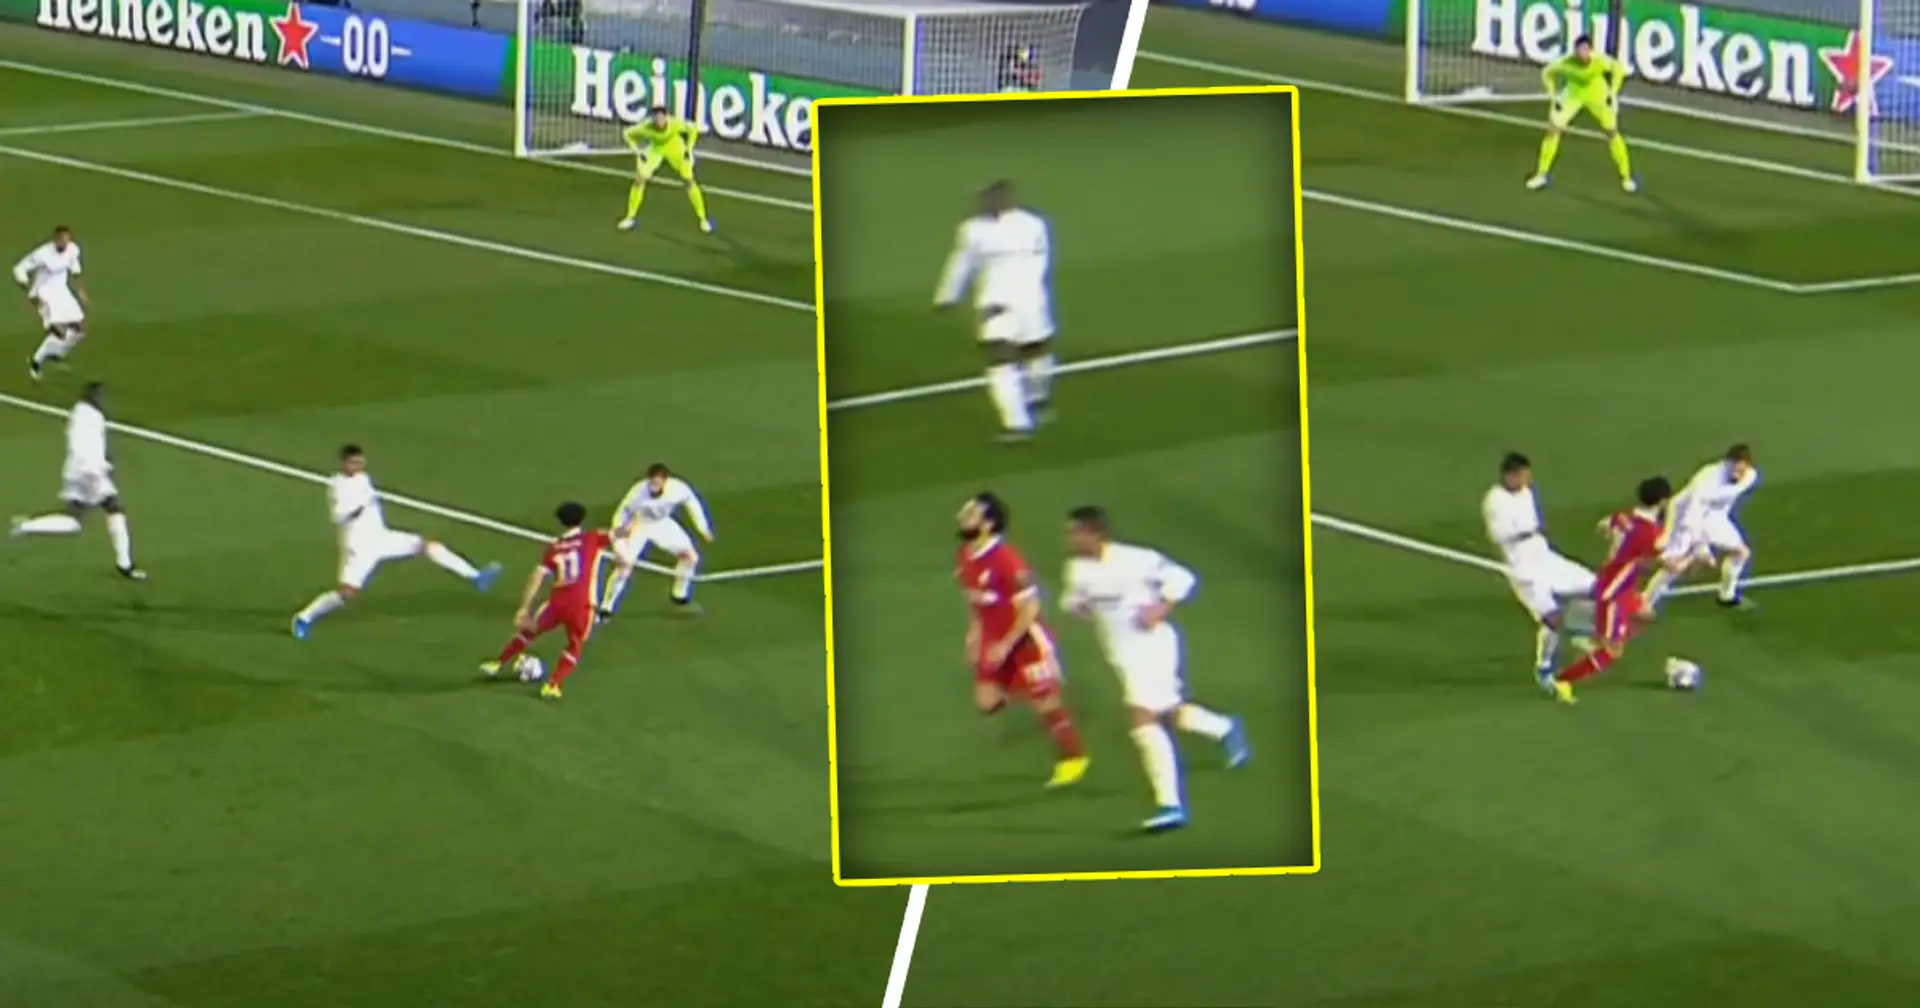 Tenacity & zeal: underrated episode from Liverpool game sums up everything we love about Casemiro